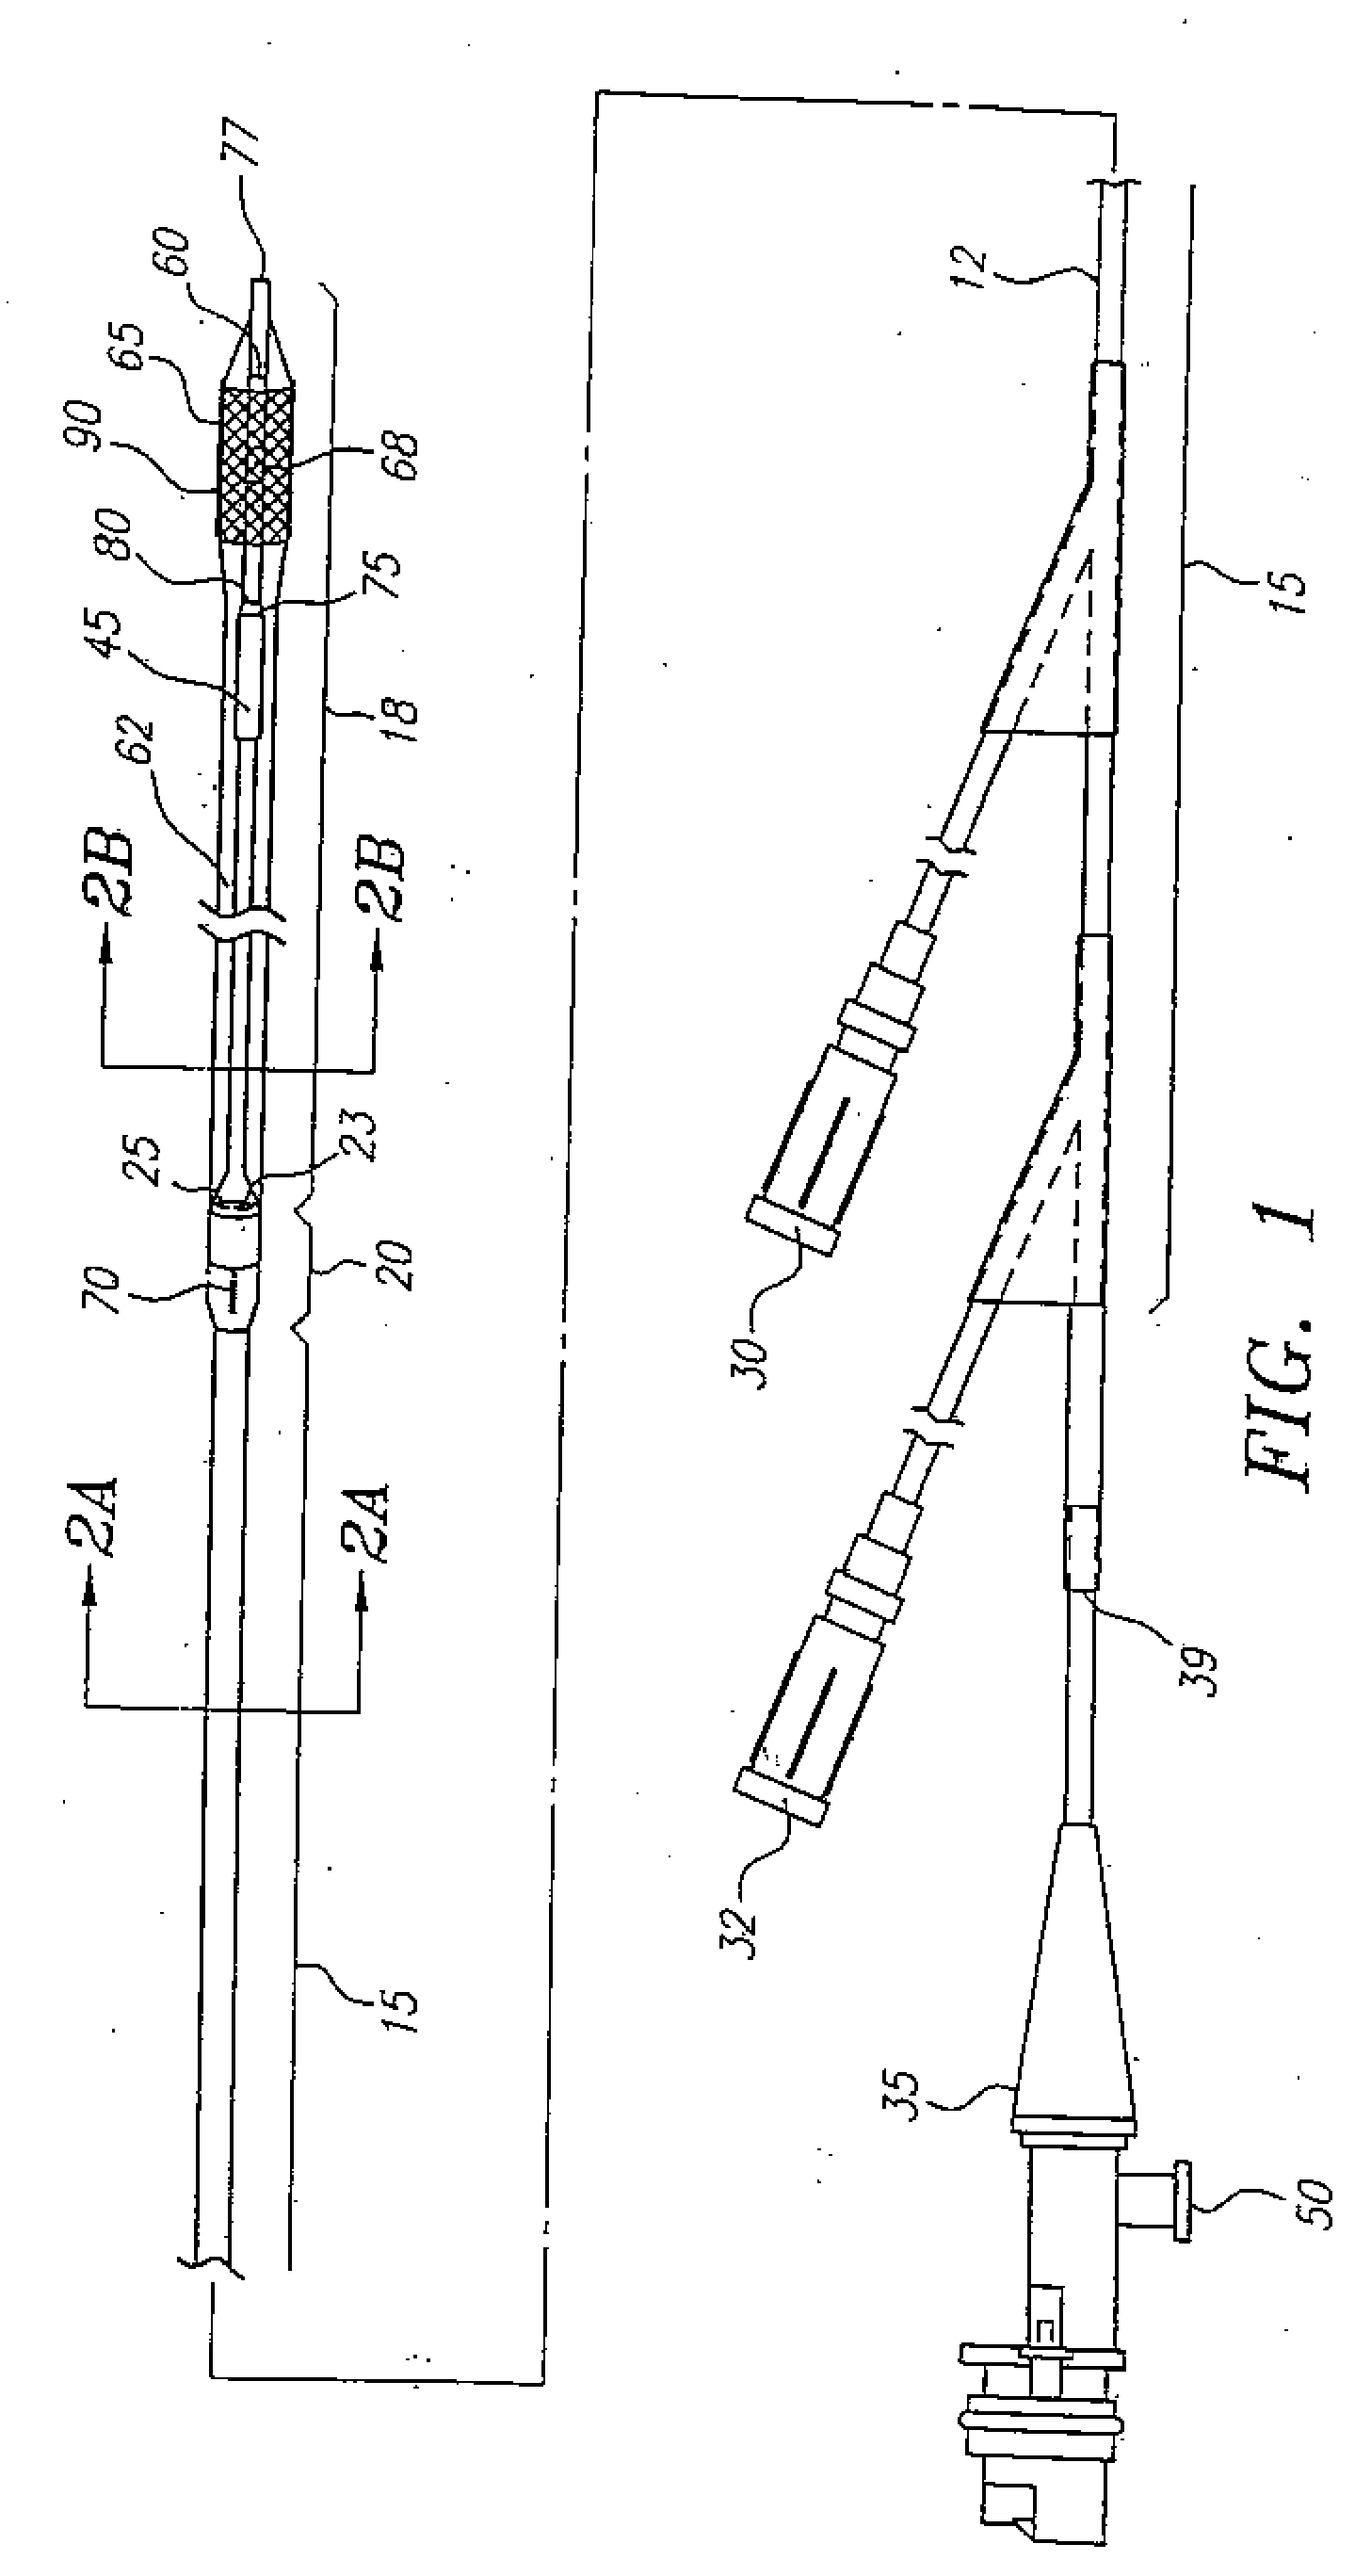 Catheter System Having Imaging, Balloon Angioplasty, And Stent Deployment Capabilities, And Method Of Use For Guided Stent Deployment